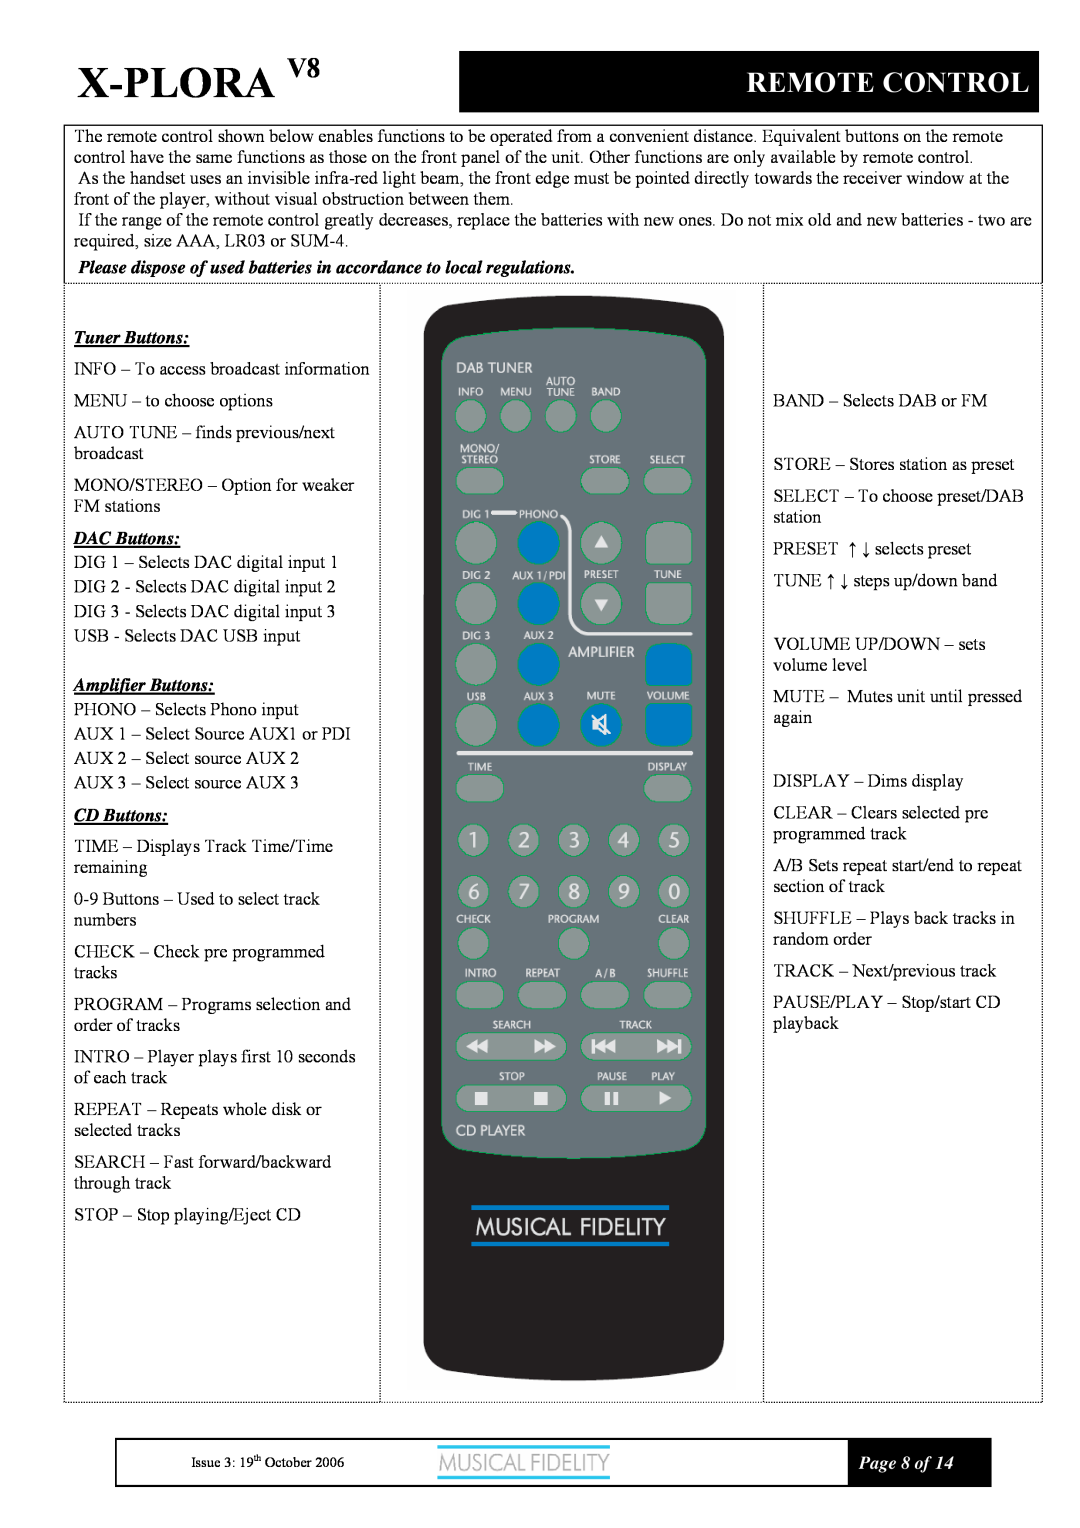 Musical Fidelity X-V8 manual Remote Control, X-Plora, Tuner Buttons, DAC Buttons, Amplifier Buttons, CD Buttons, Page 8 of 